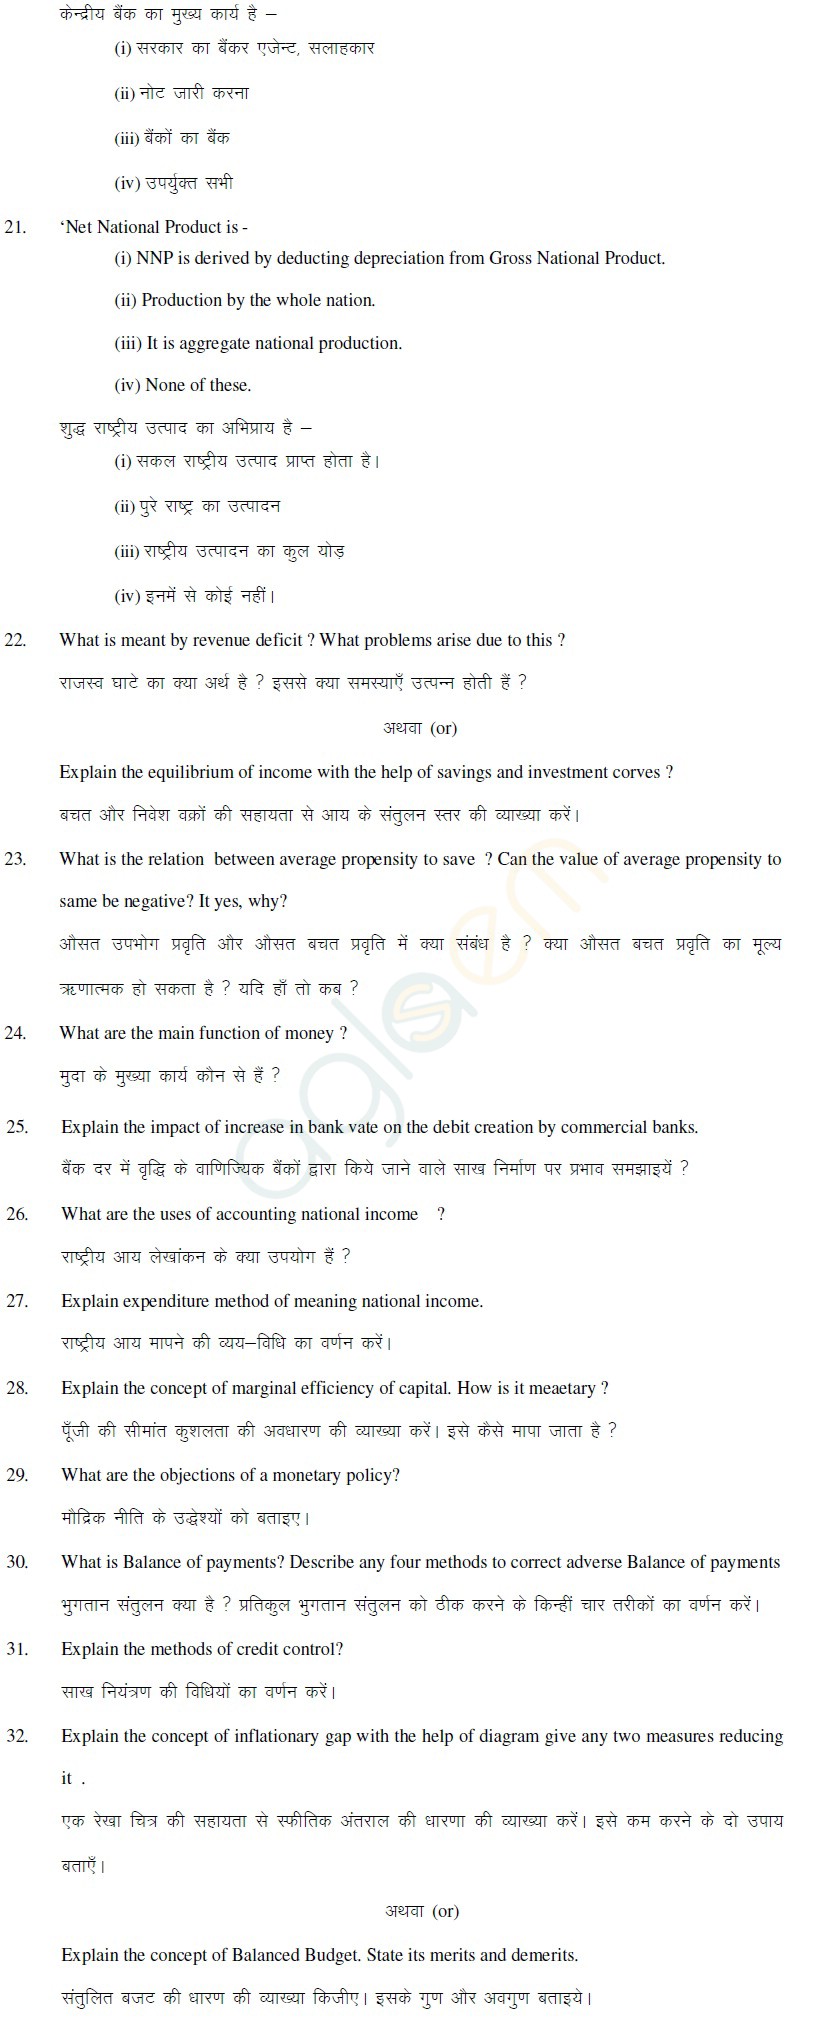 Jharkhand Board Class XII Sample Papers 2013 – ECONOMICE (COM & SCI)